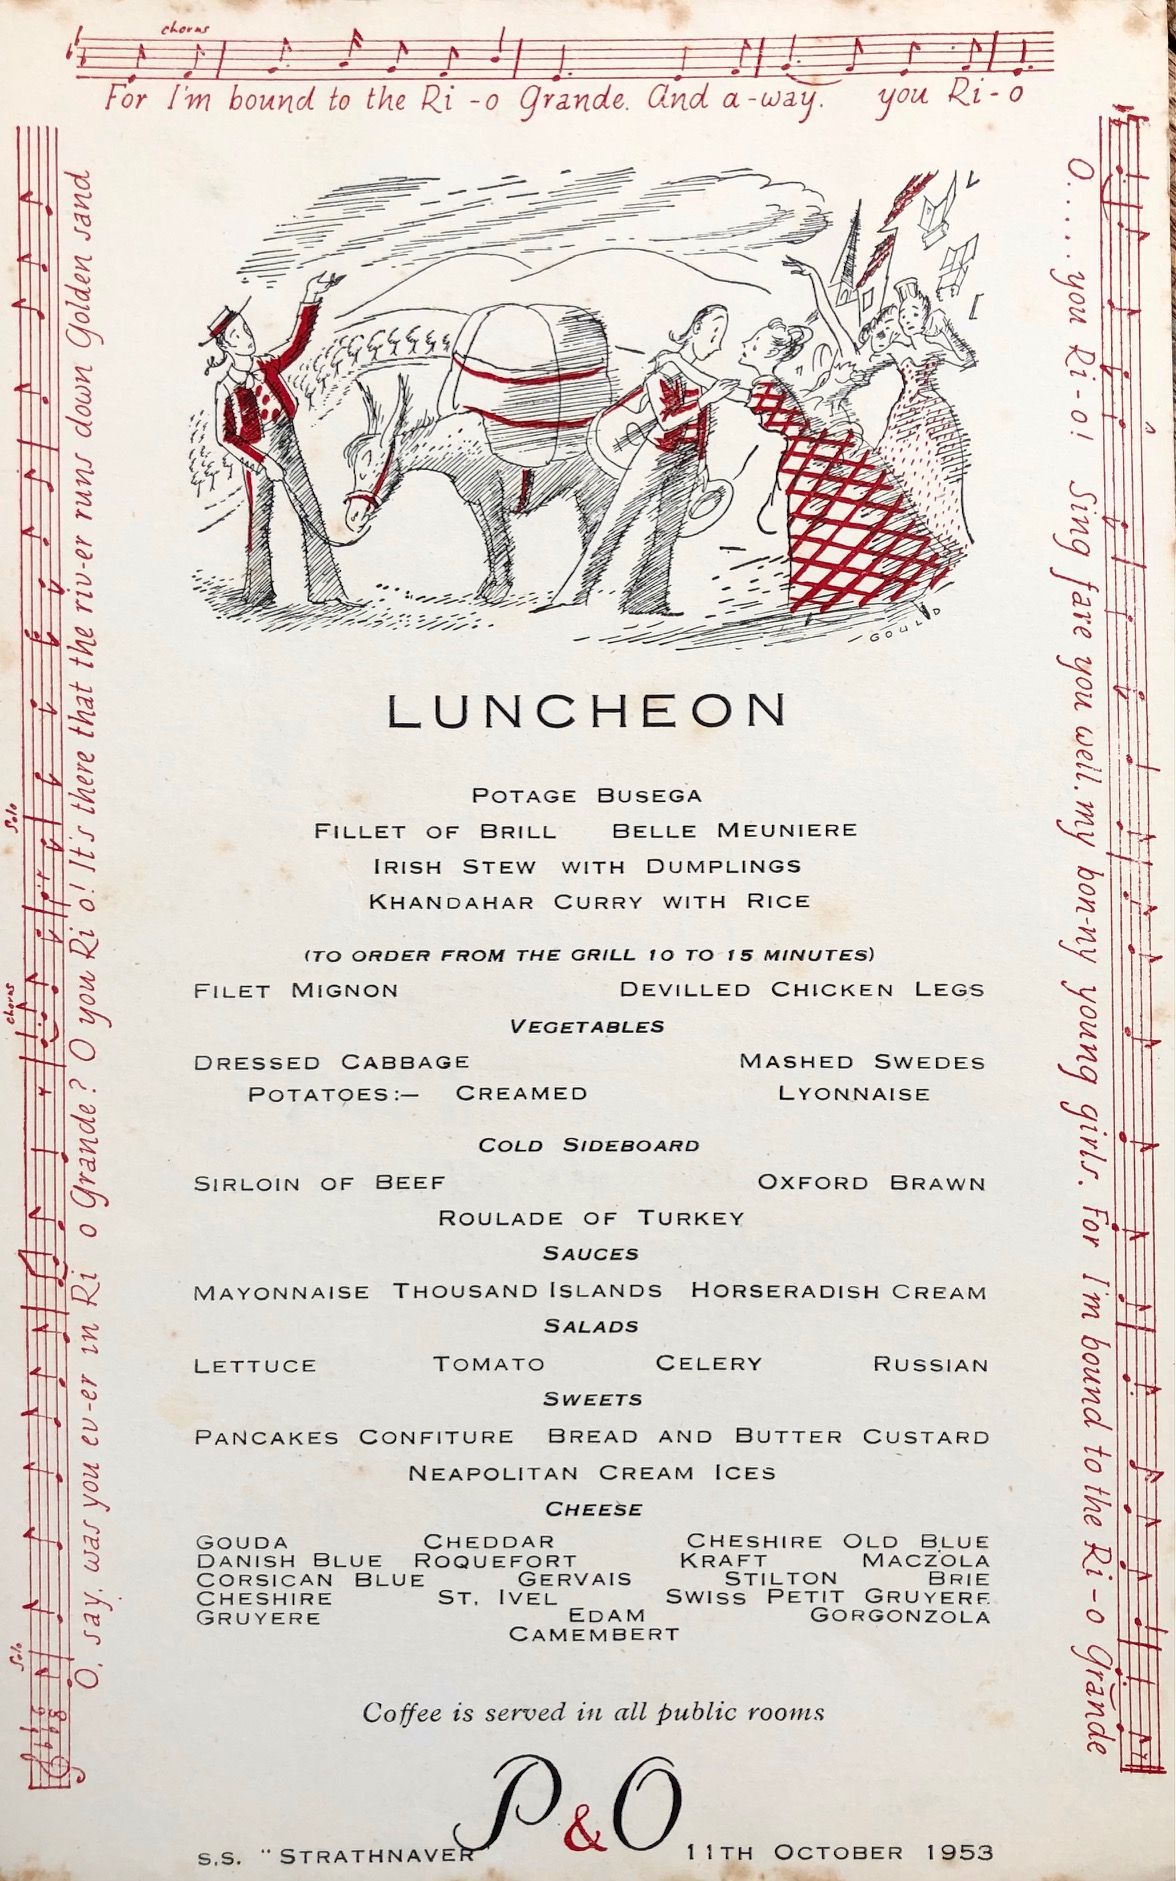 *NEW* P & O Lines. S.S. "Strathnaver" Luncheon Menu - Bound for the Rio Grande